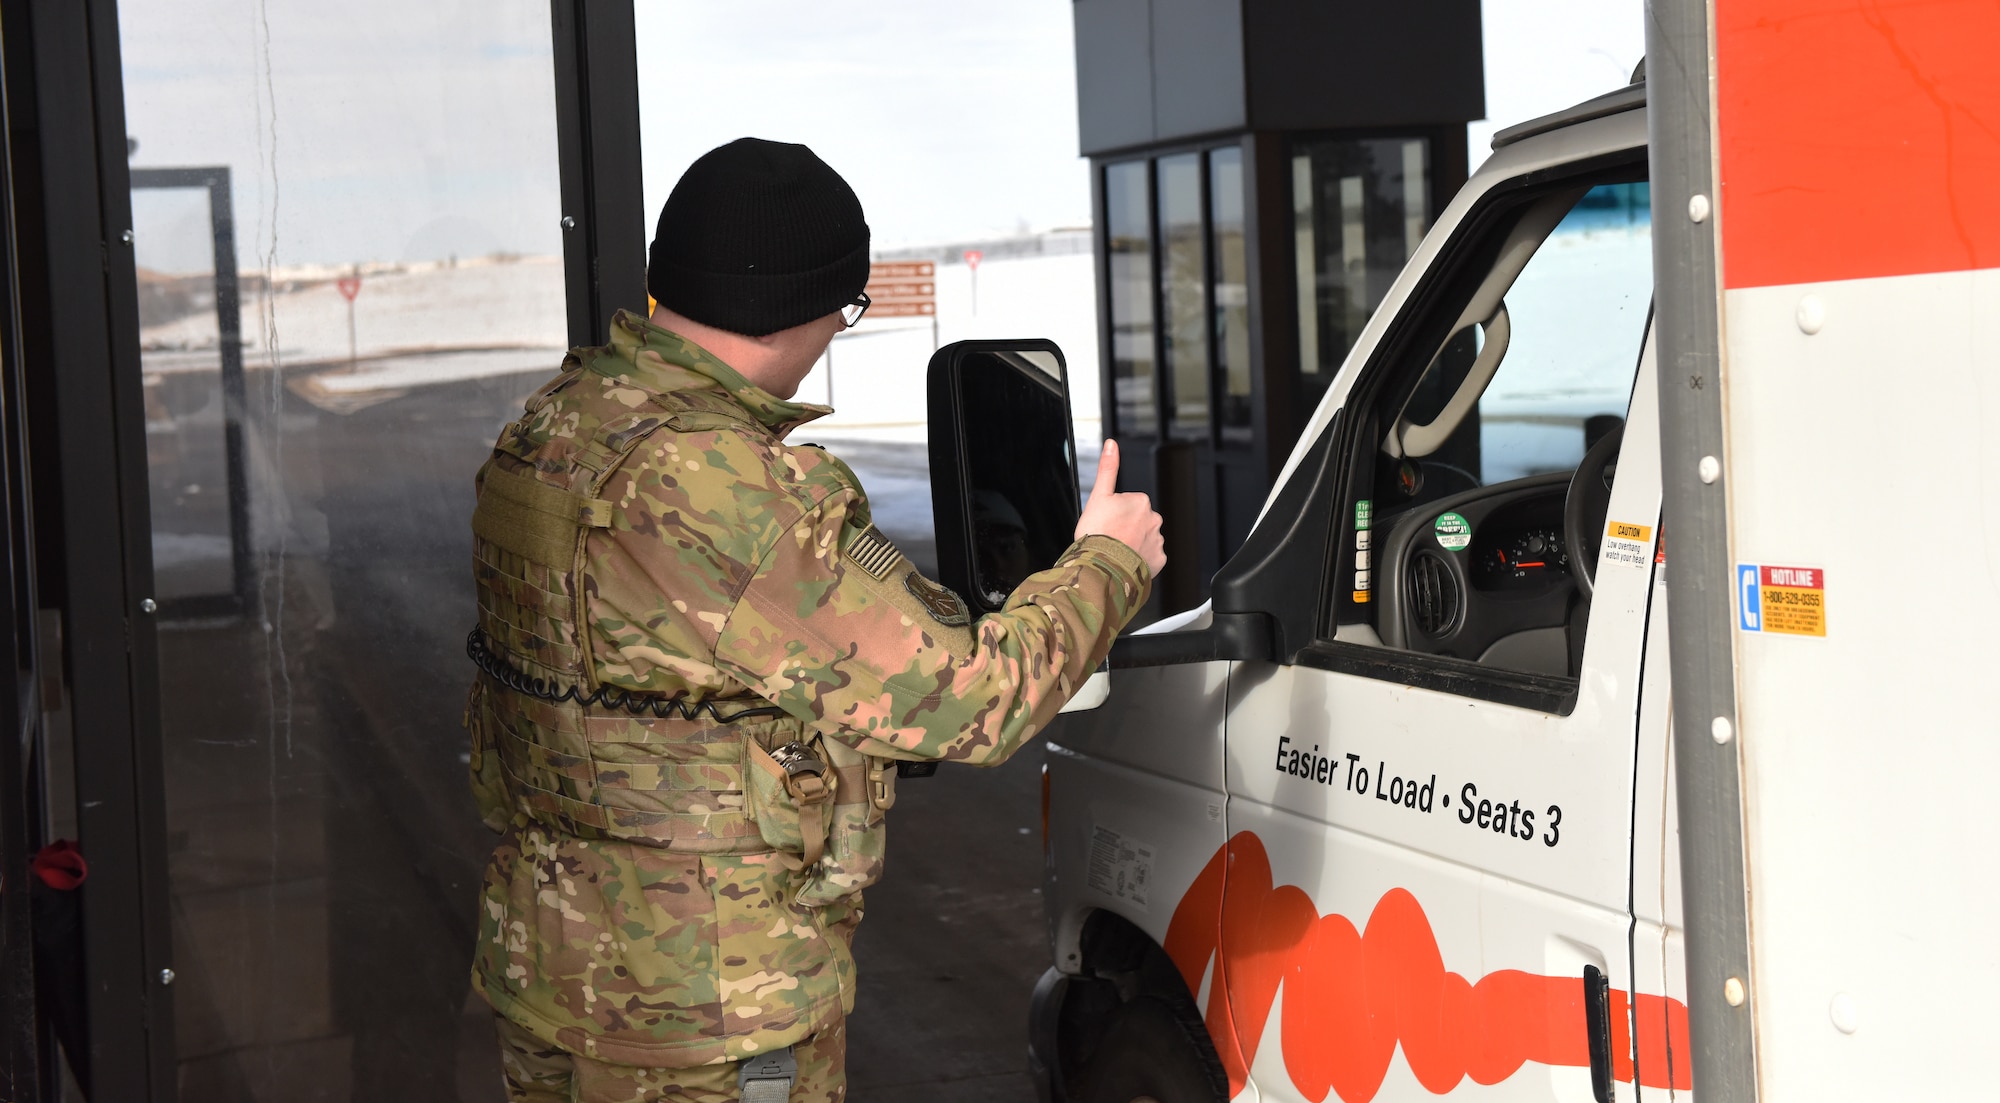 Senior Airman Taylor Tschida, a 28th Security Forces Squadron alarm monitor, lets a mover know that he’s good to go through Liberty Gate and on to base housing at Ellsworth Air Force Base, S.D., Dec. 4, 2018. Each person that comes through the gate gets checked for proper authorization, correct seatbelt wear and that their vehicle has registration on the plates. (U.S. Air Force photo by 2nd Lt. Joshua Sinclair)